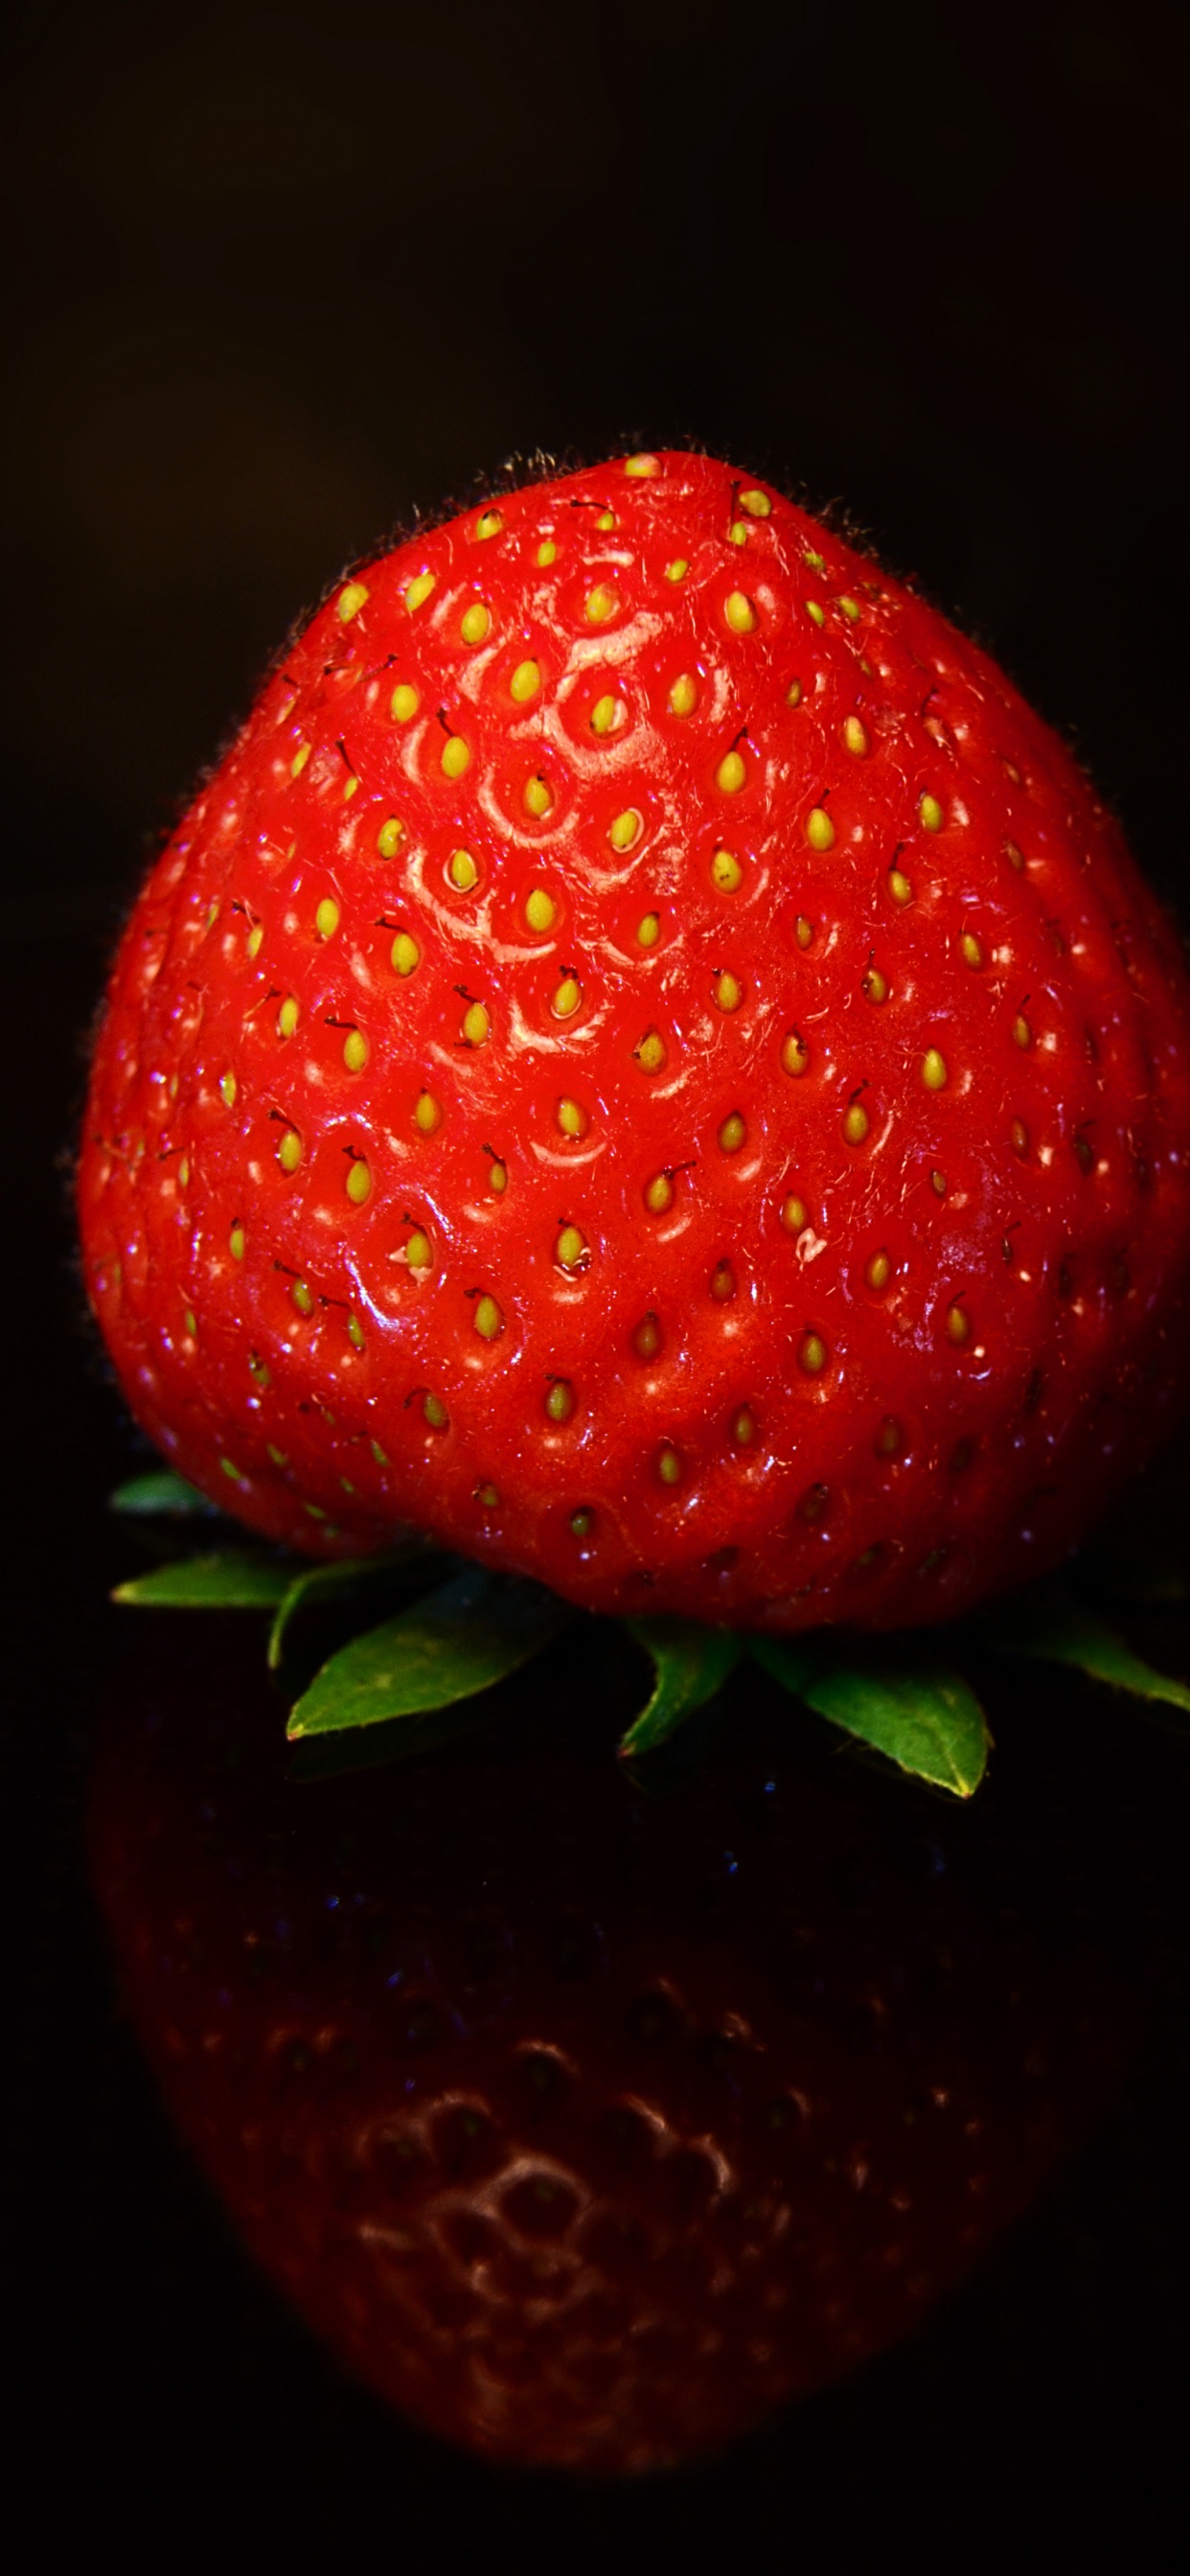 Red Strawberry Fruit in Close up Photography. Wallpaper in 1242x2688 Resolution